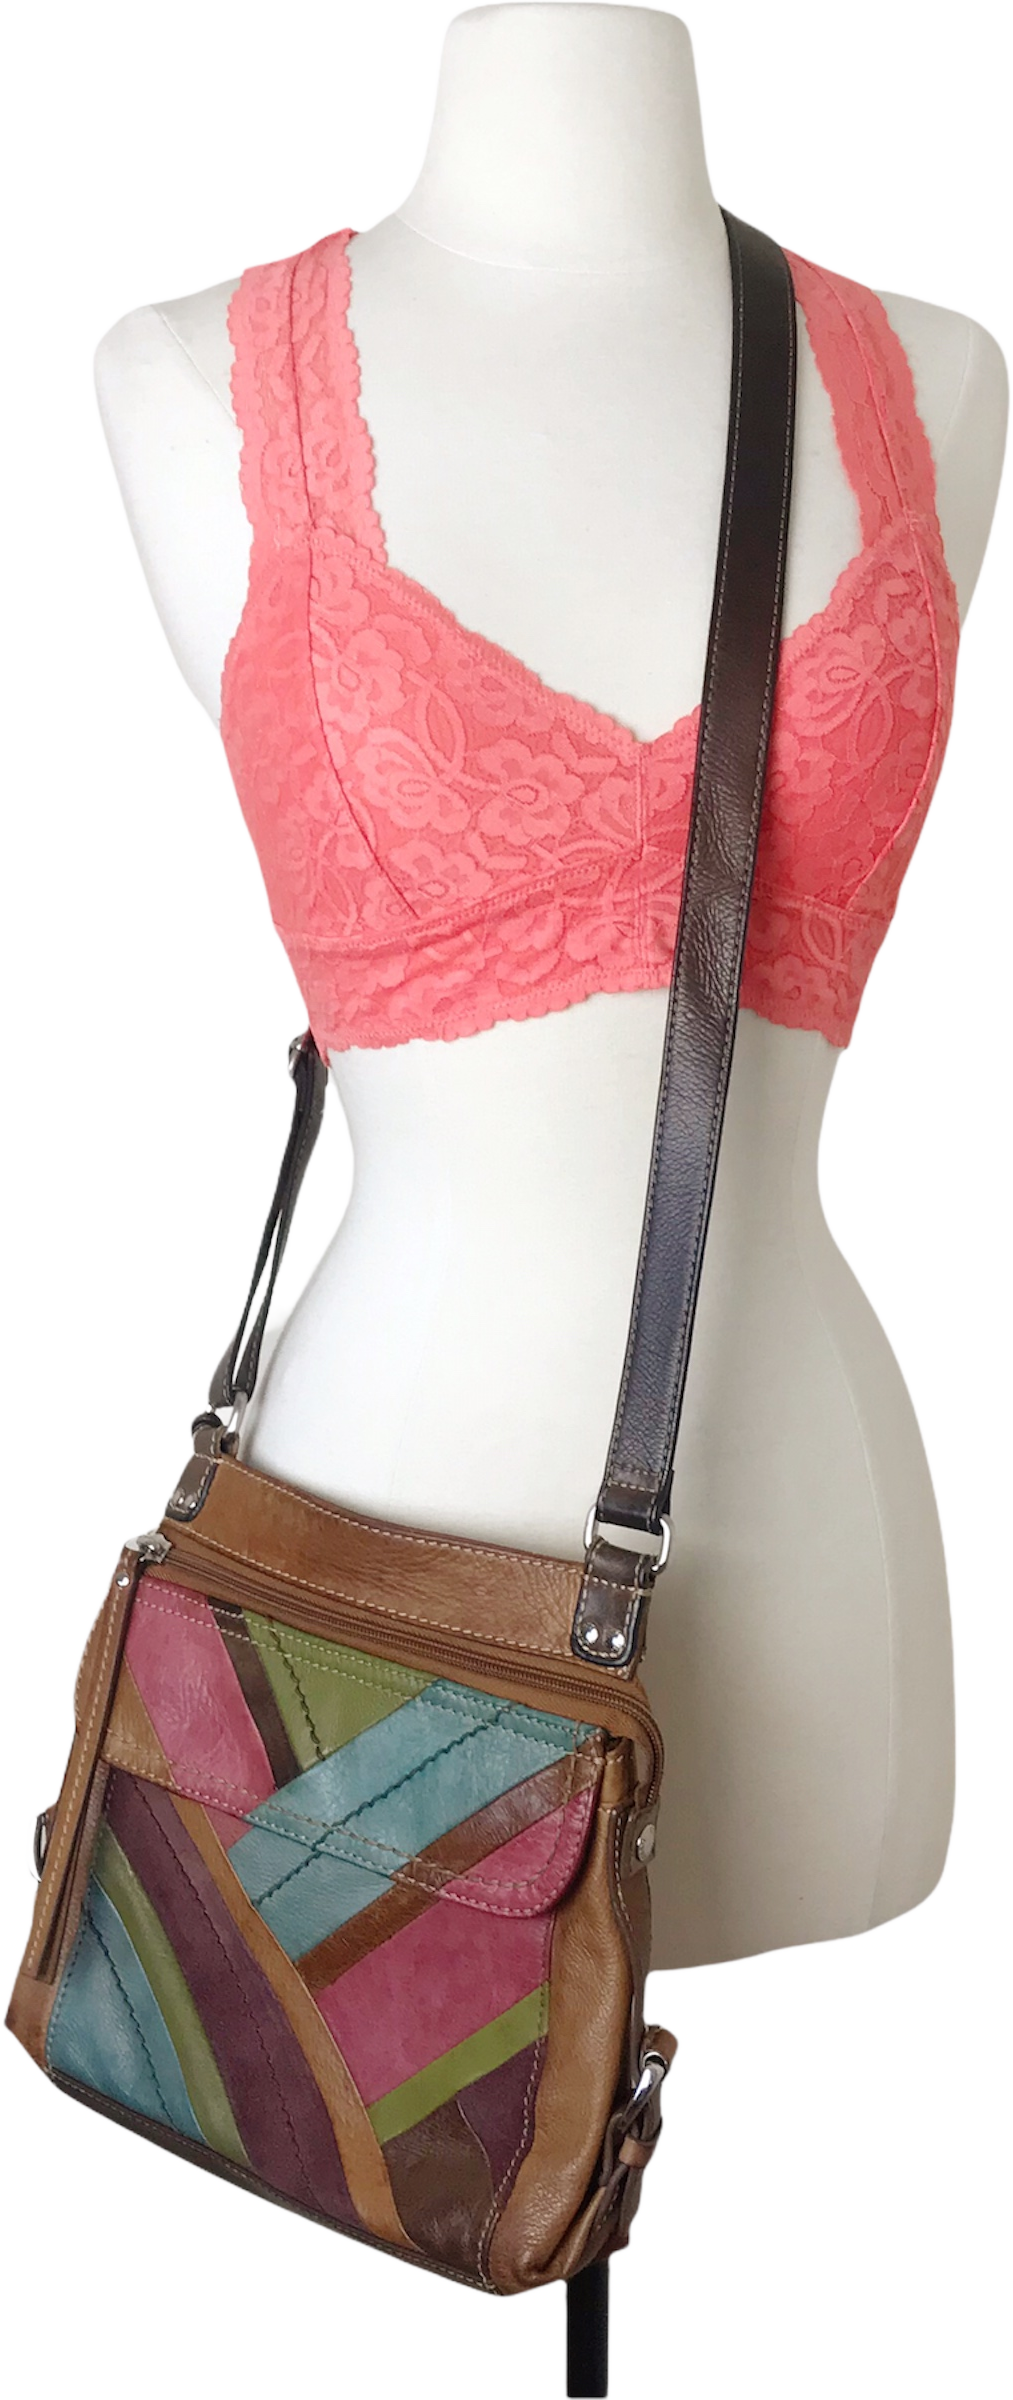 Fossil Heart Leather Mixed Media Patchwork Crossbody Bag